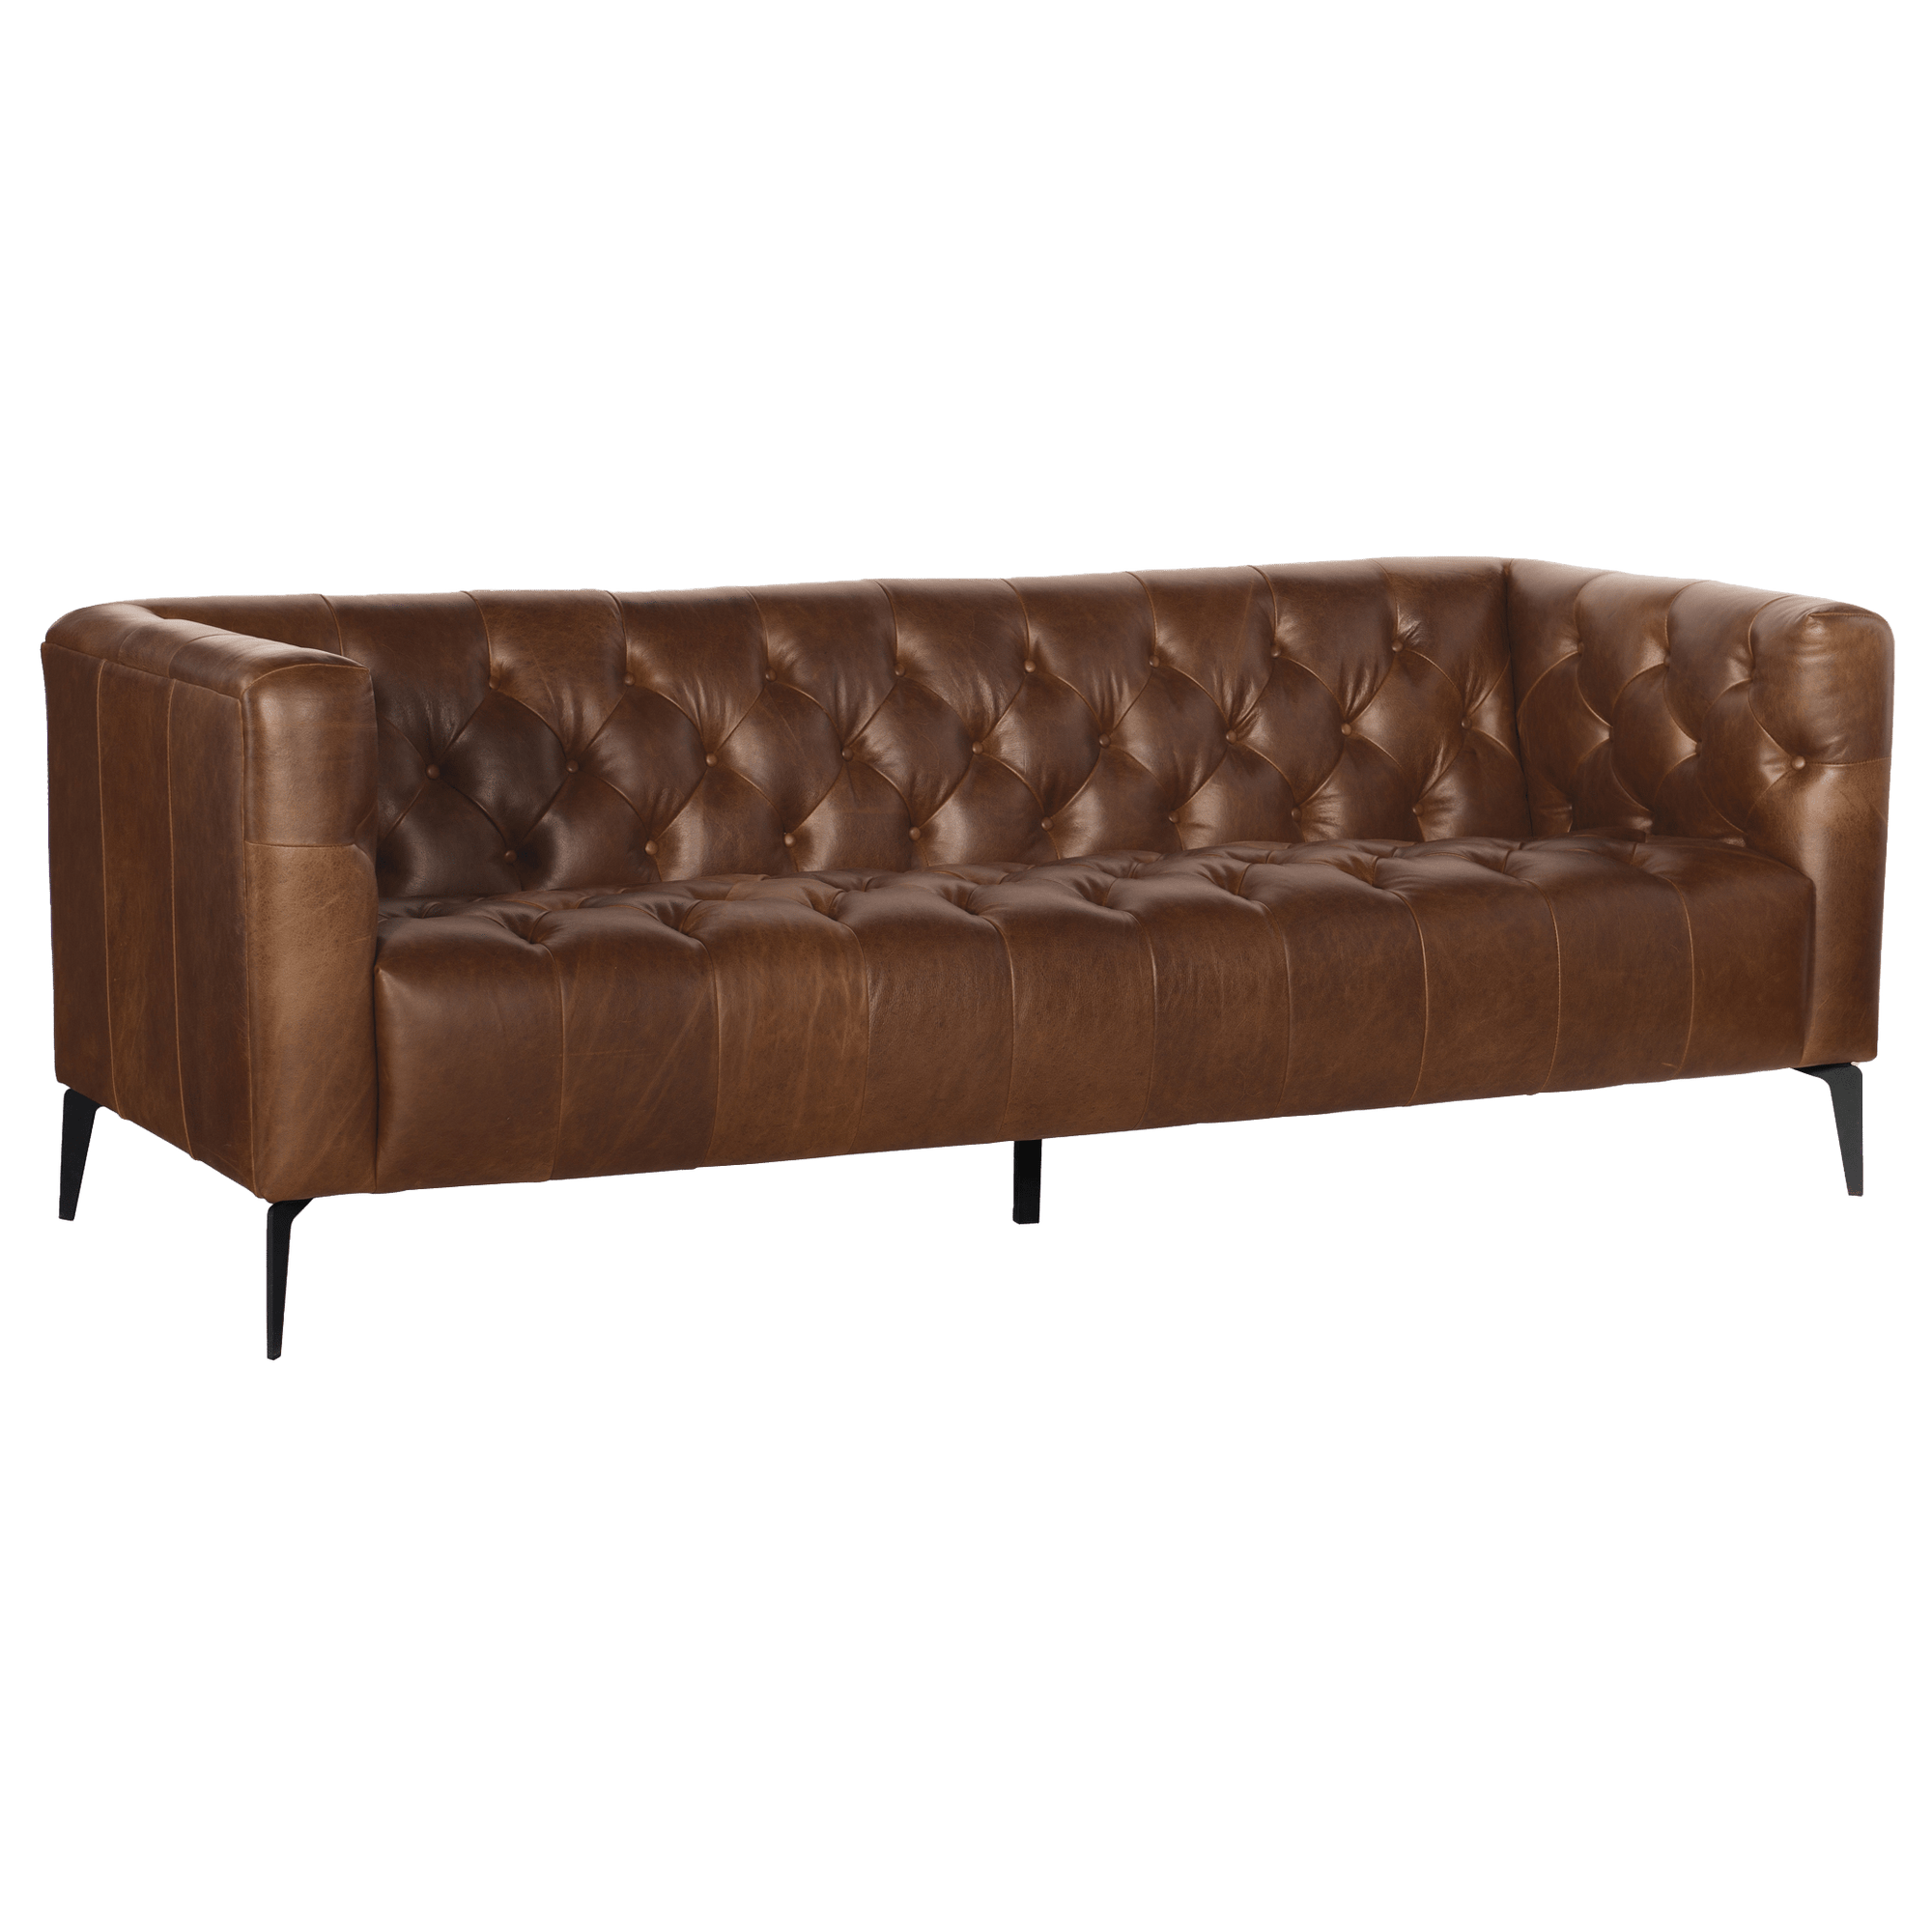 Nonie 84" Wide Upholstered Leather Sofa, Brown - Coja